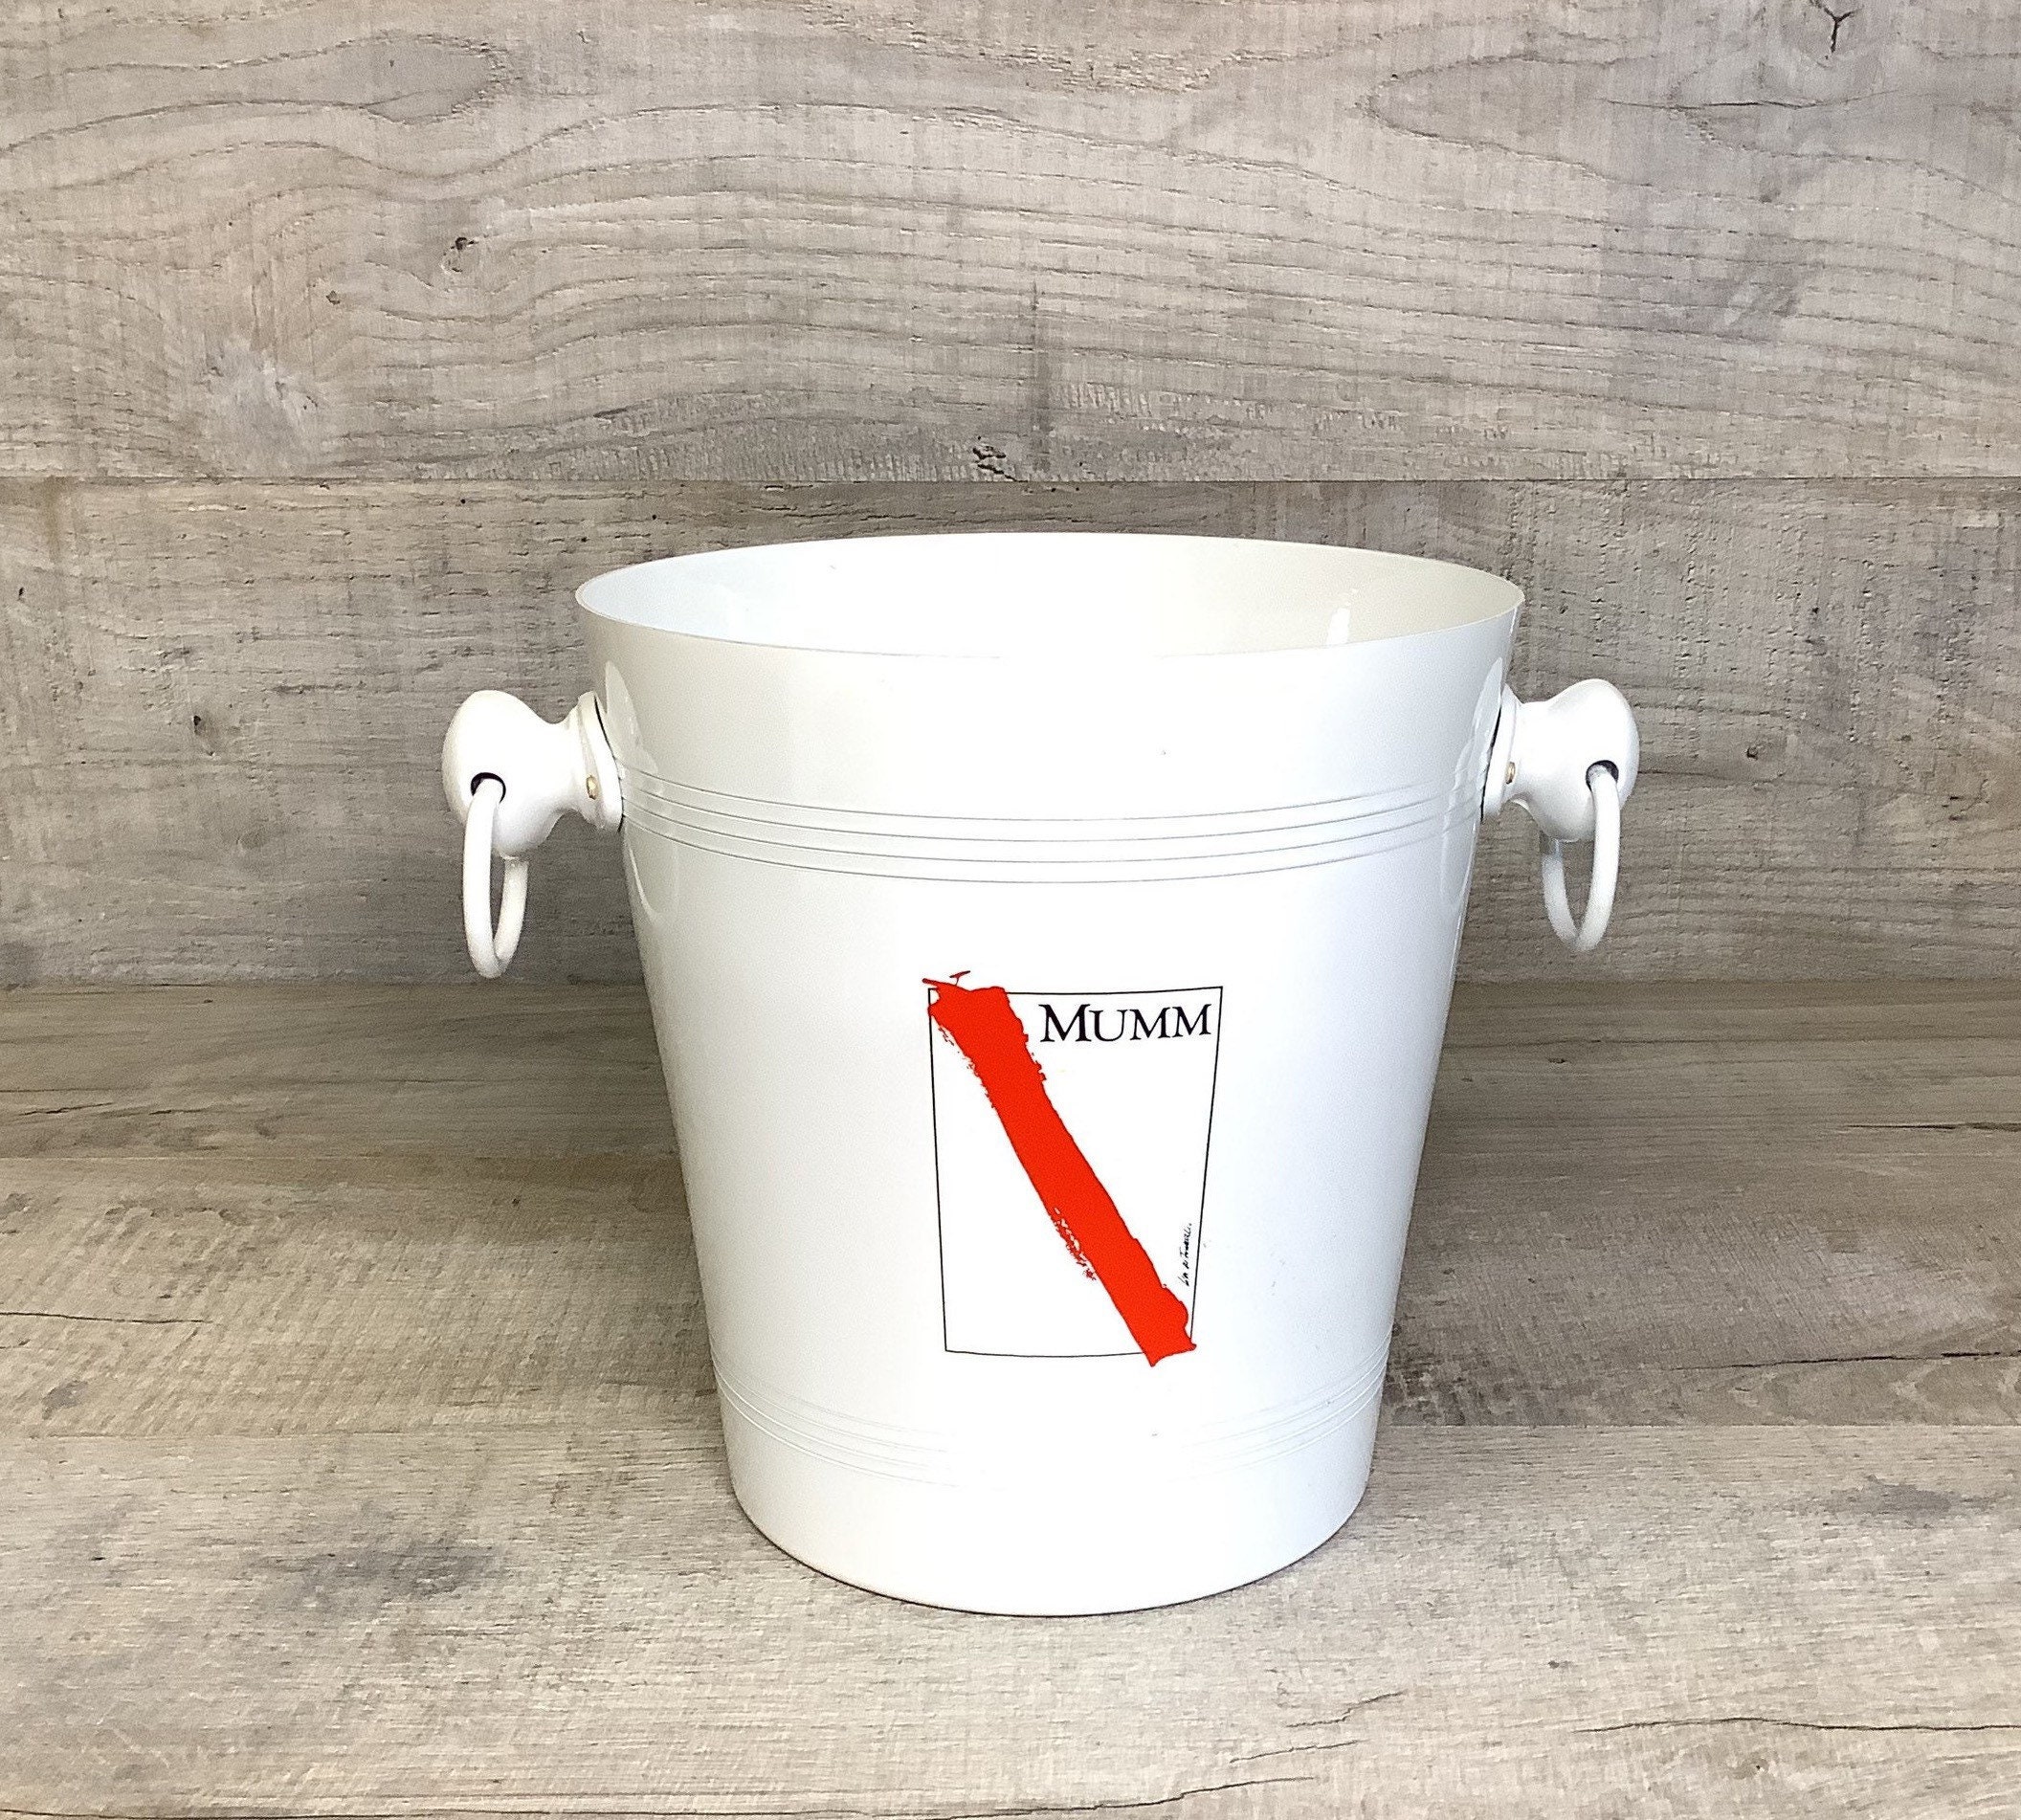 Seau à Champagne Mumm/Champagne Ice Bucket From Mumm/ Mint Cooler Vintage Made in France